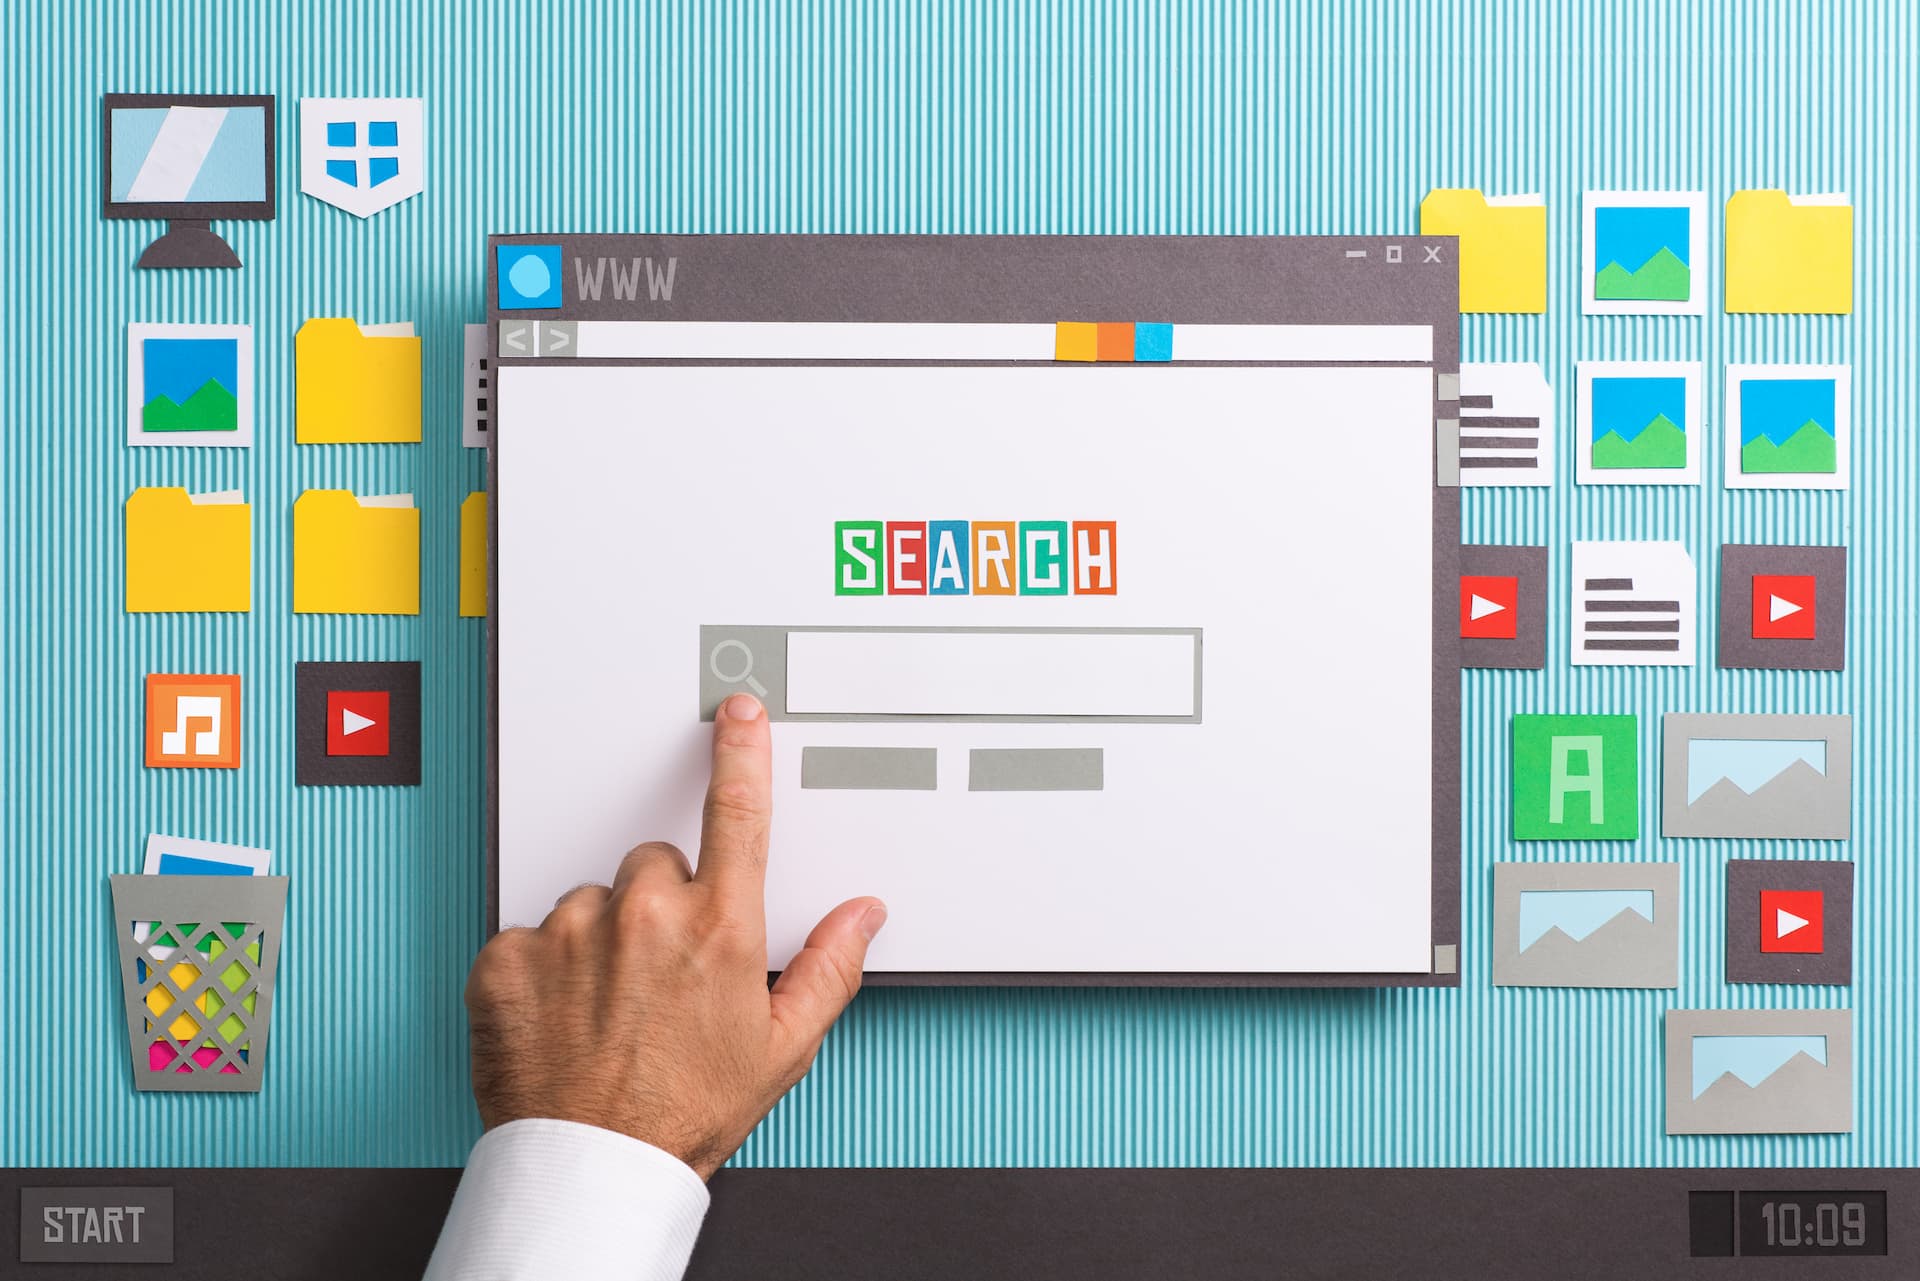 How do search engines rank your content?